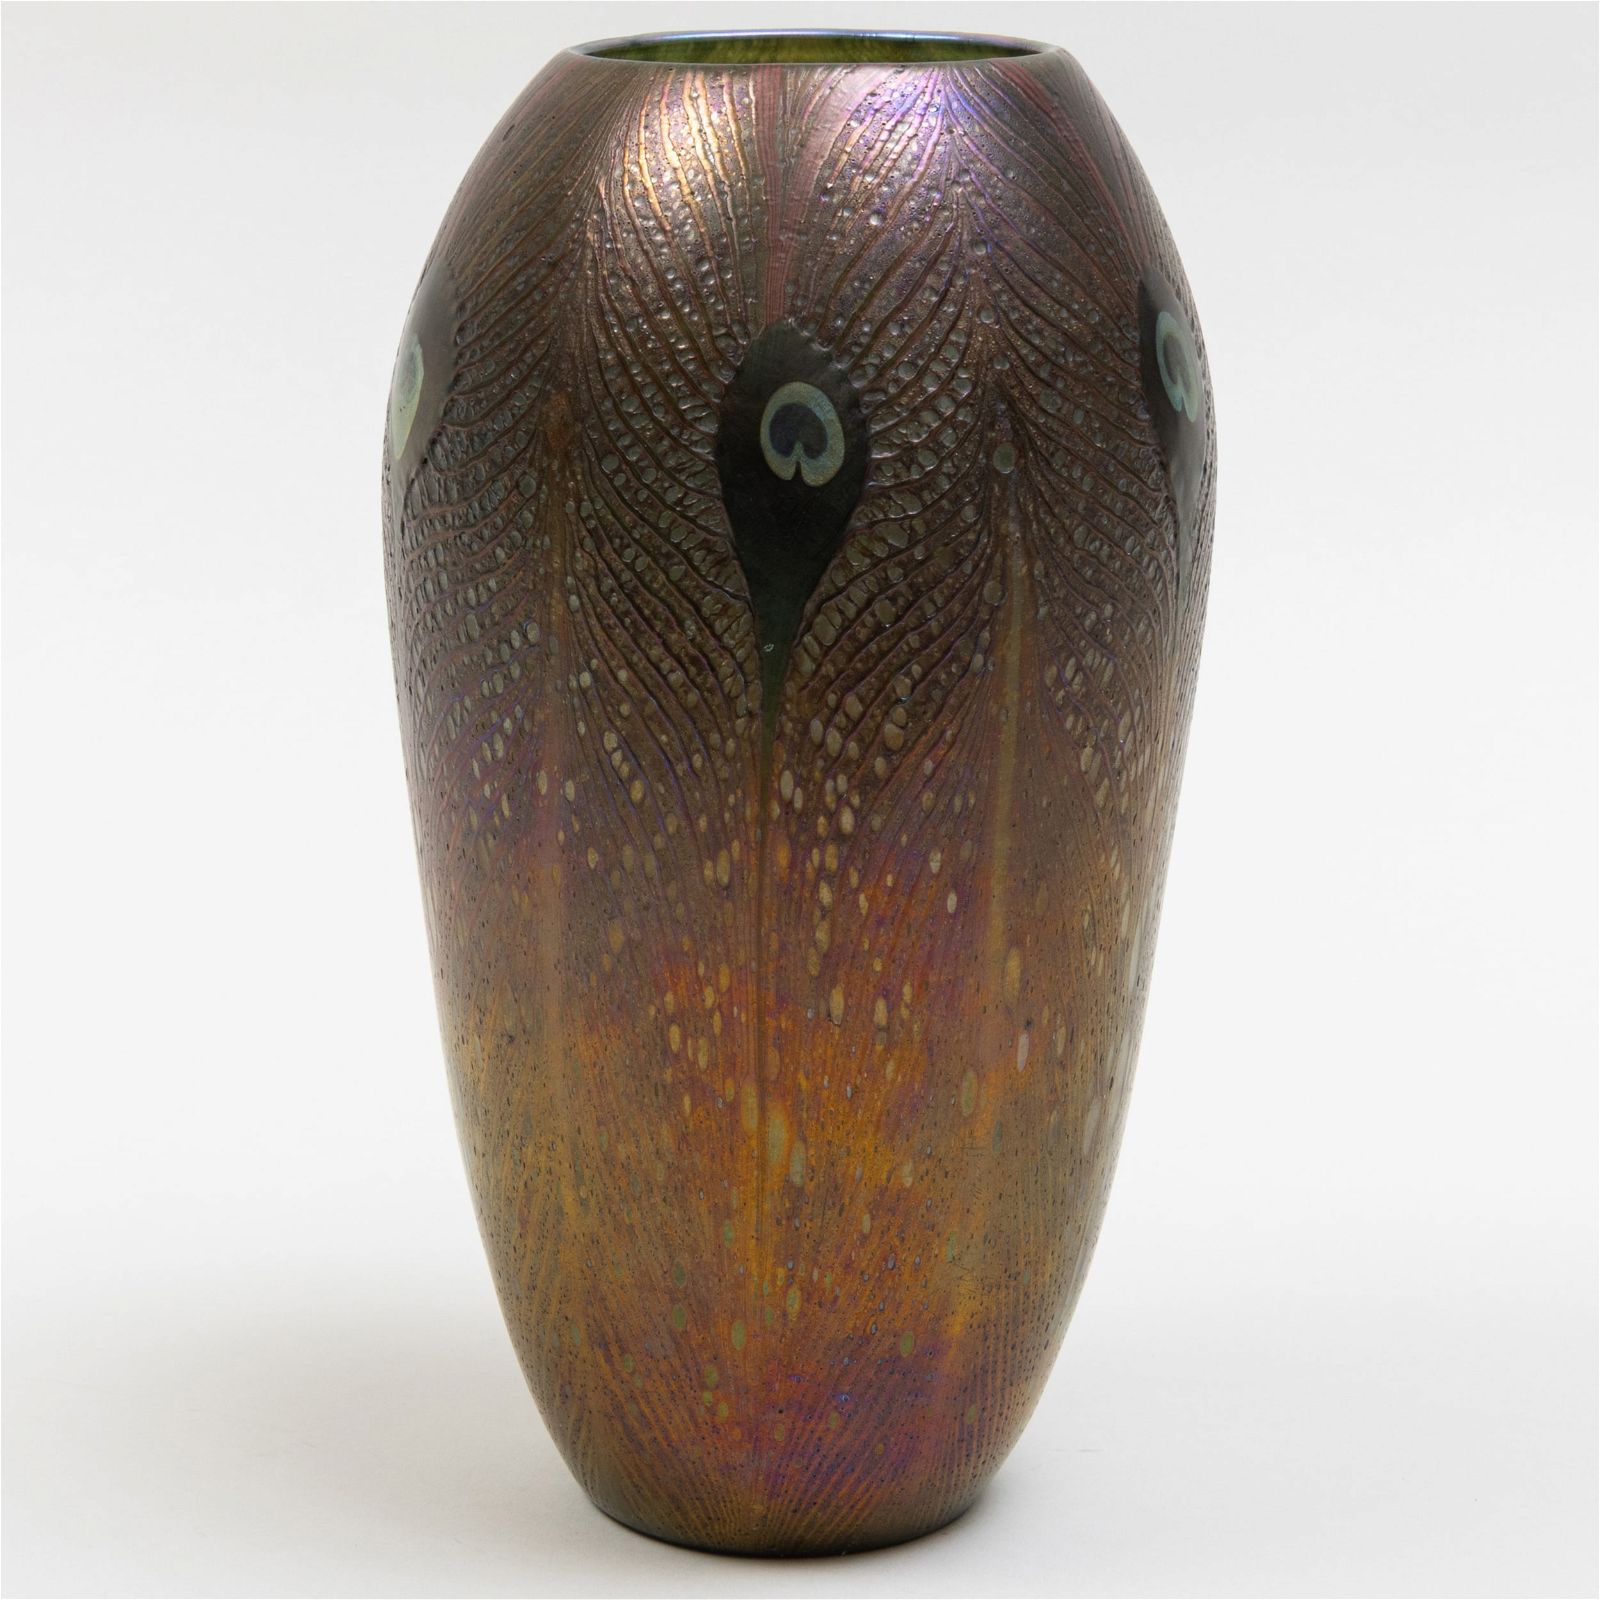 Tiffany favrile glass peacock feathers vase, which sold for $26,800 at Stair Galleries.
